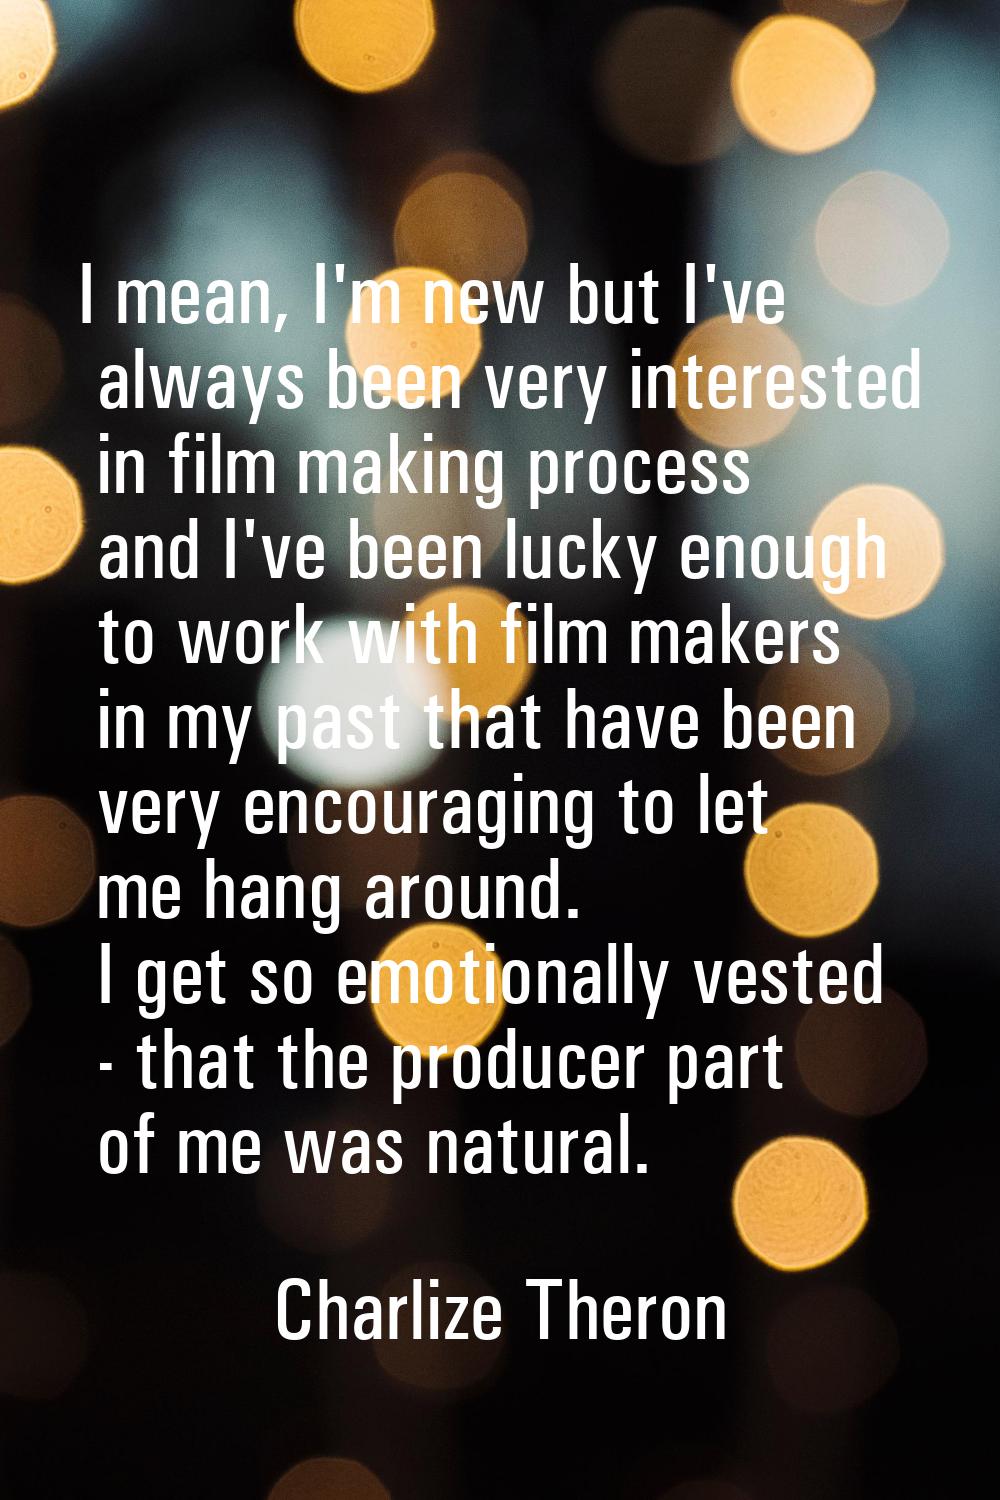 I mean, I'm new but I've always been very interested in film making process and I've been lucky eno